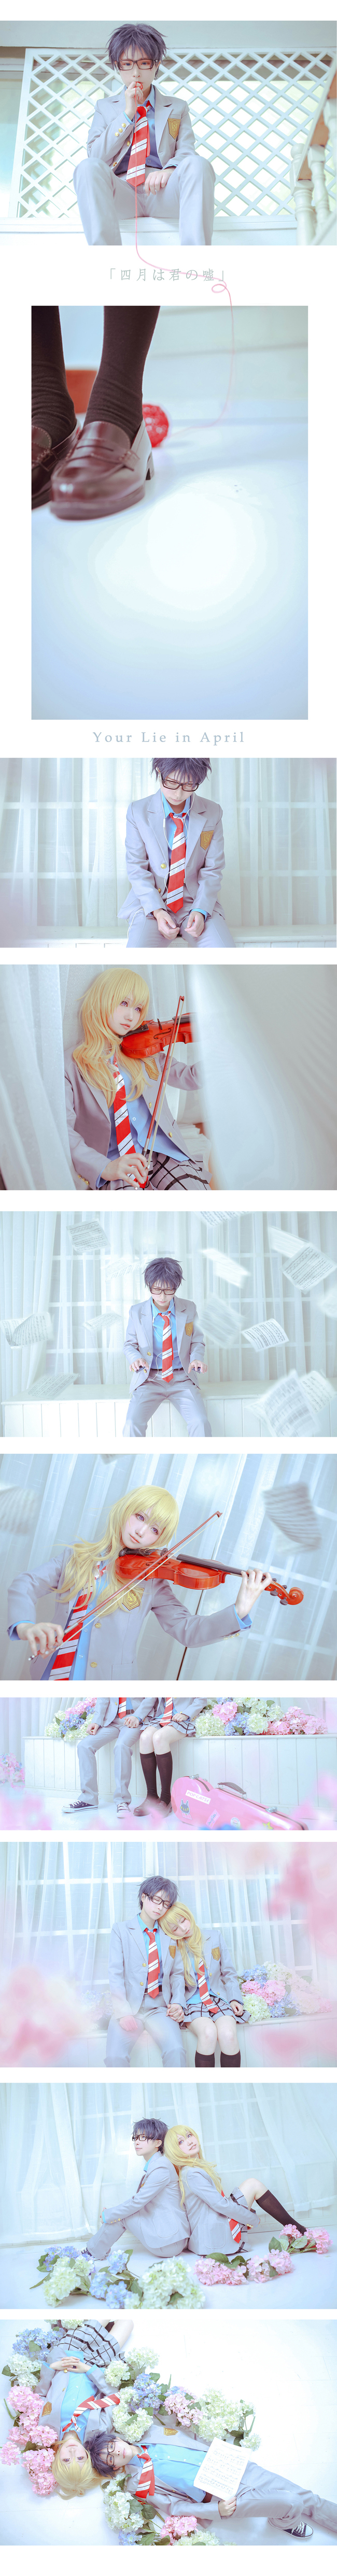 Cosplayers Recreate Beautiful Your Lie in April Photos 4